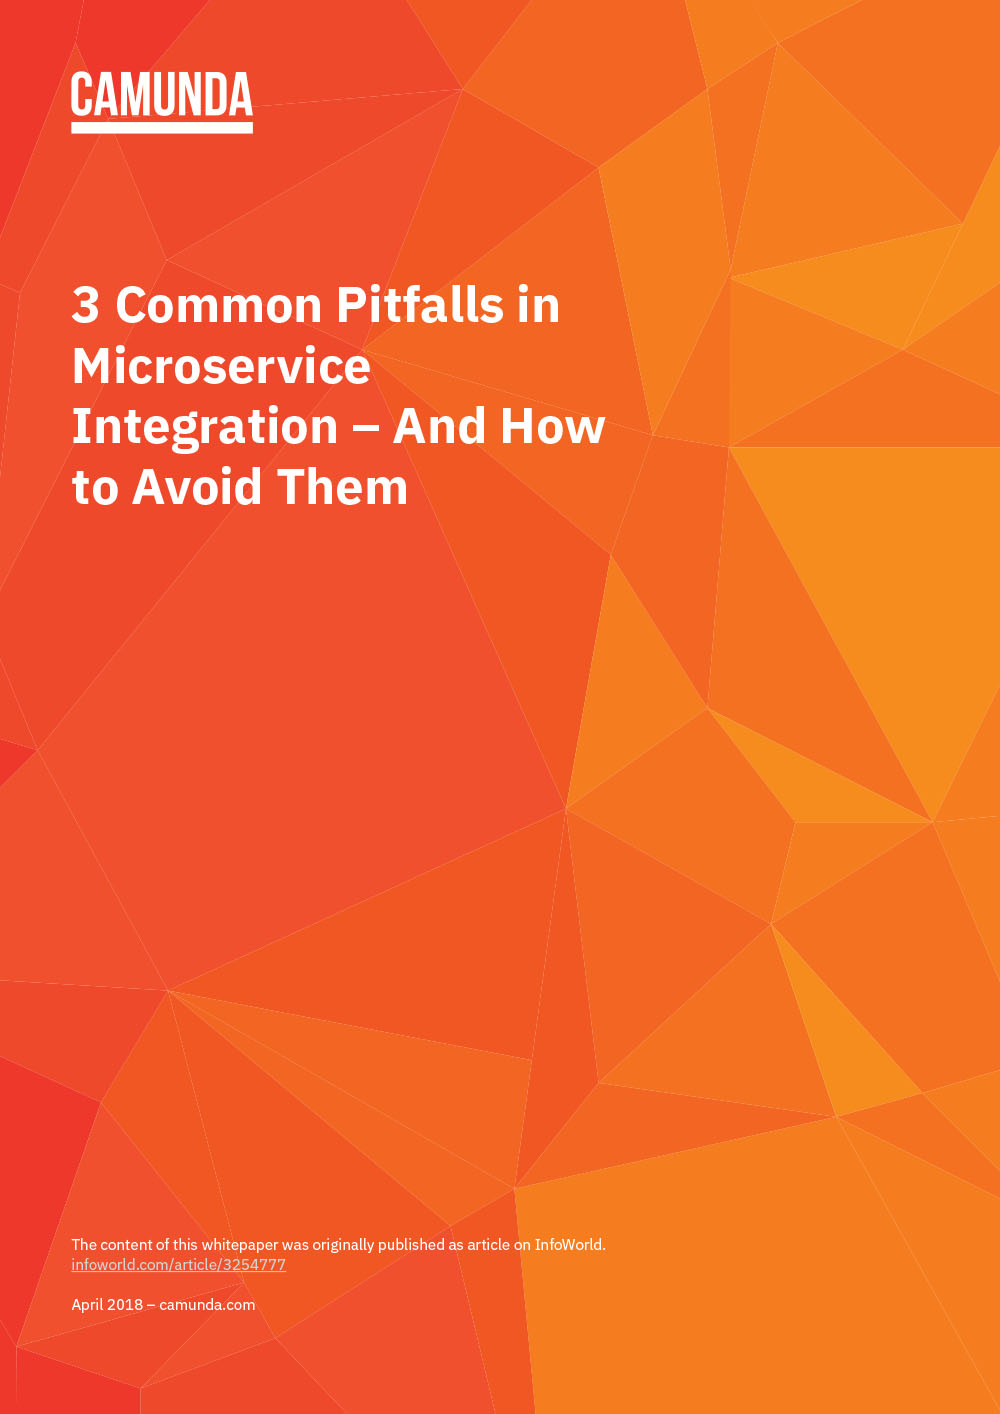 3 Common Pitfalls in Microservice Integration – And How to Avoid Them